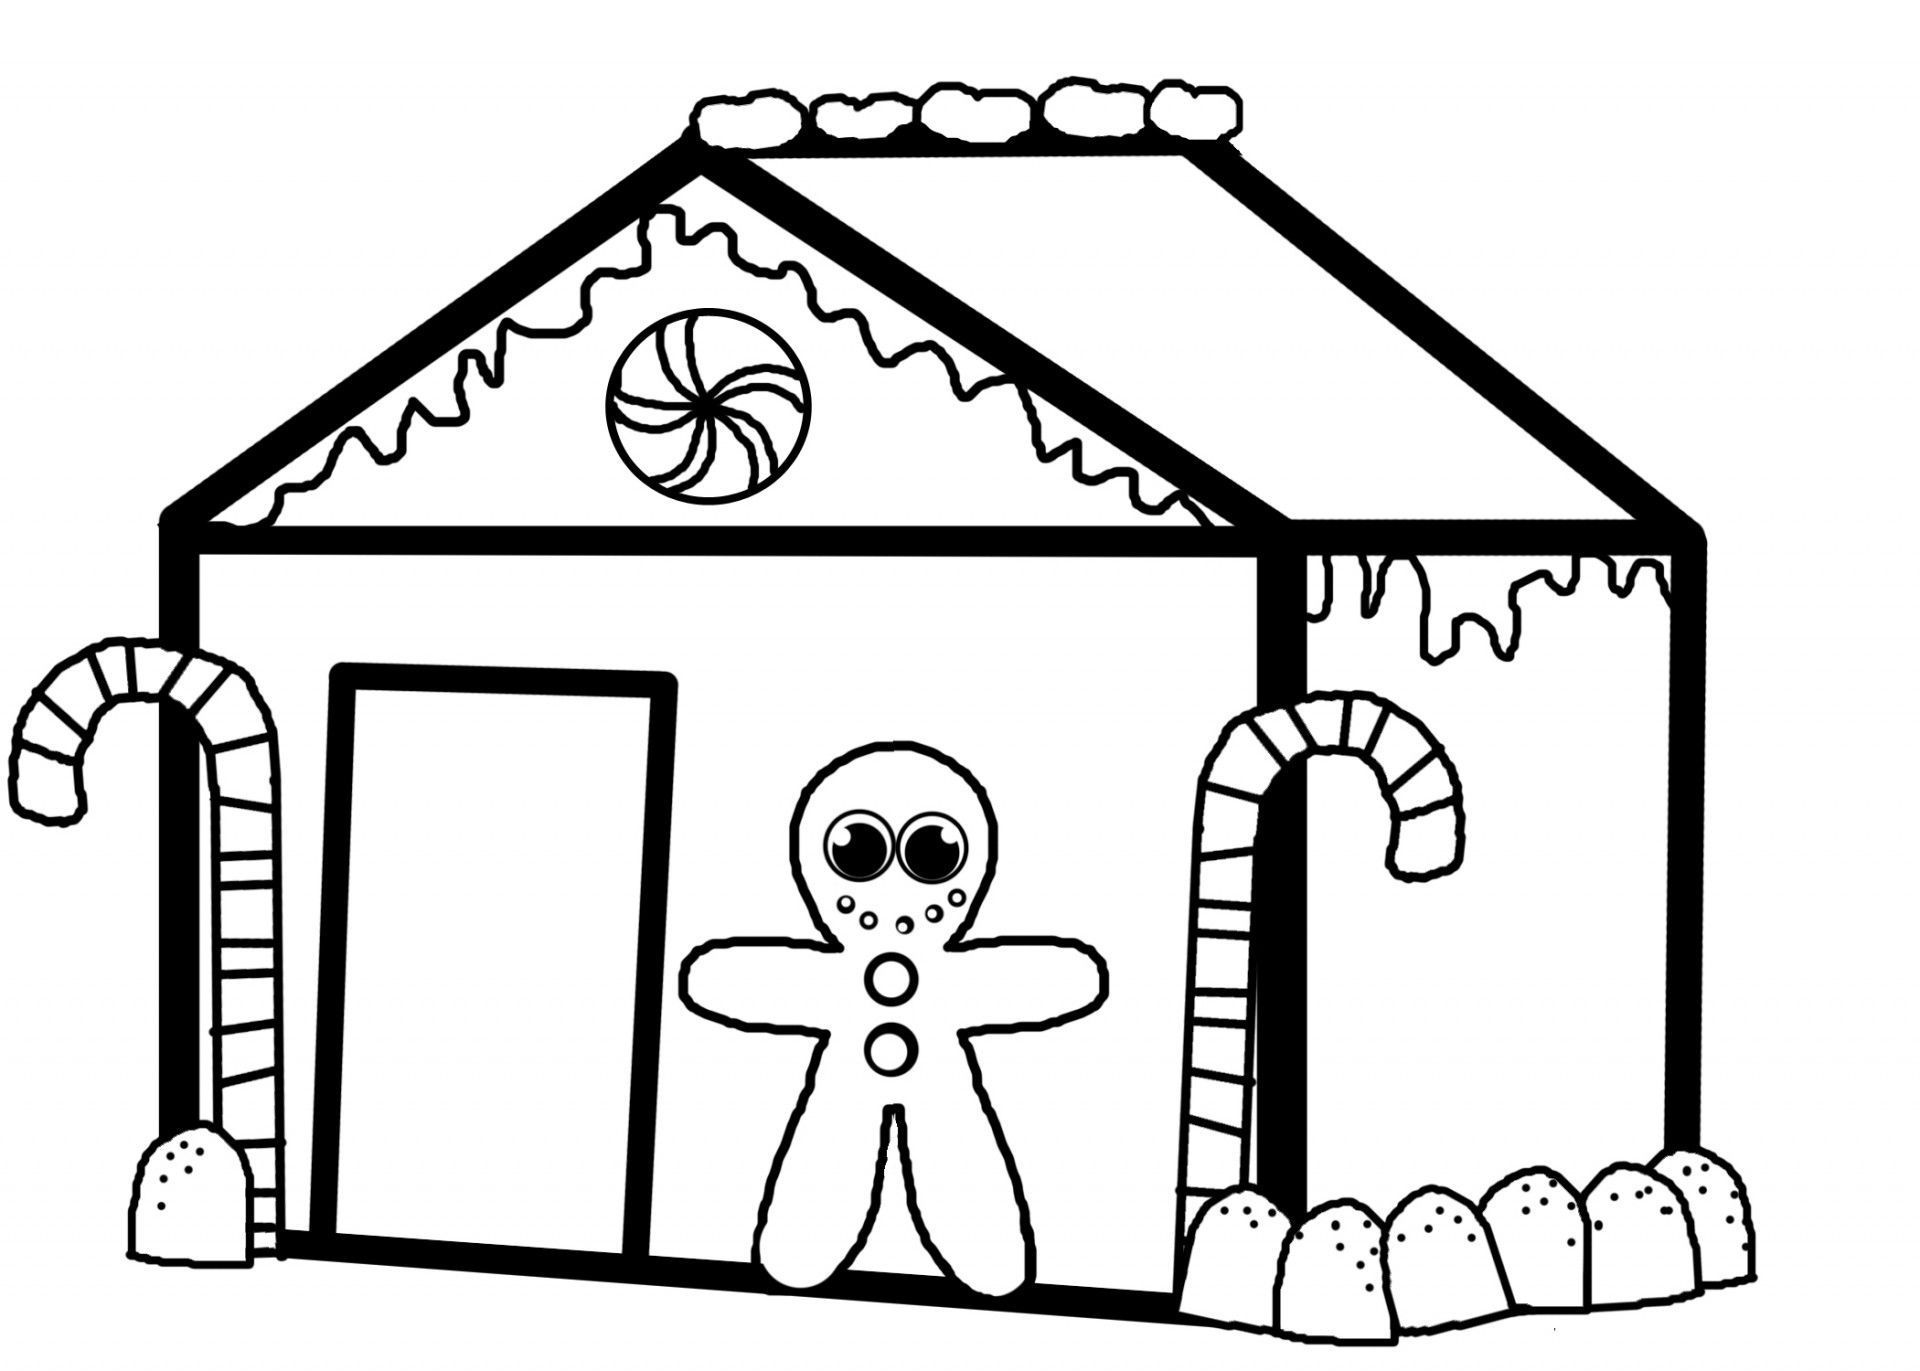 Printable Gingerbread House Coloring Pages - Coloring Home